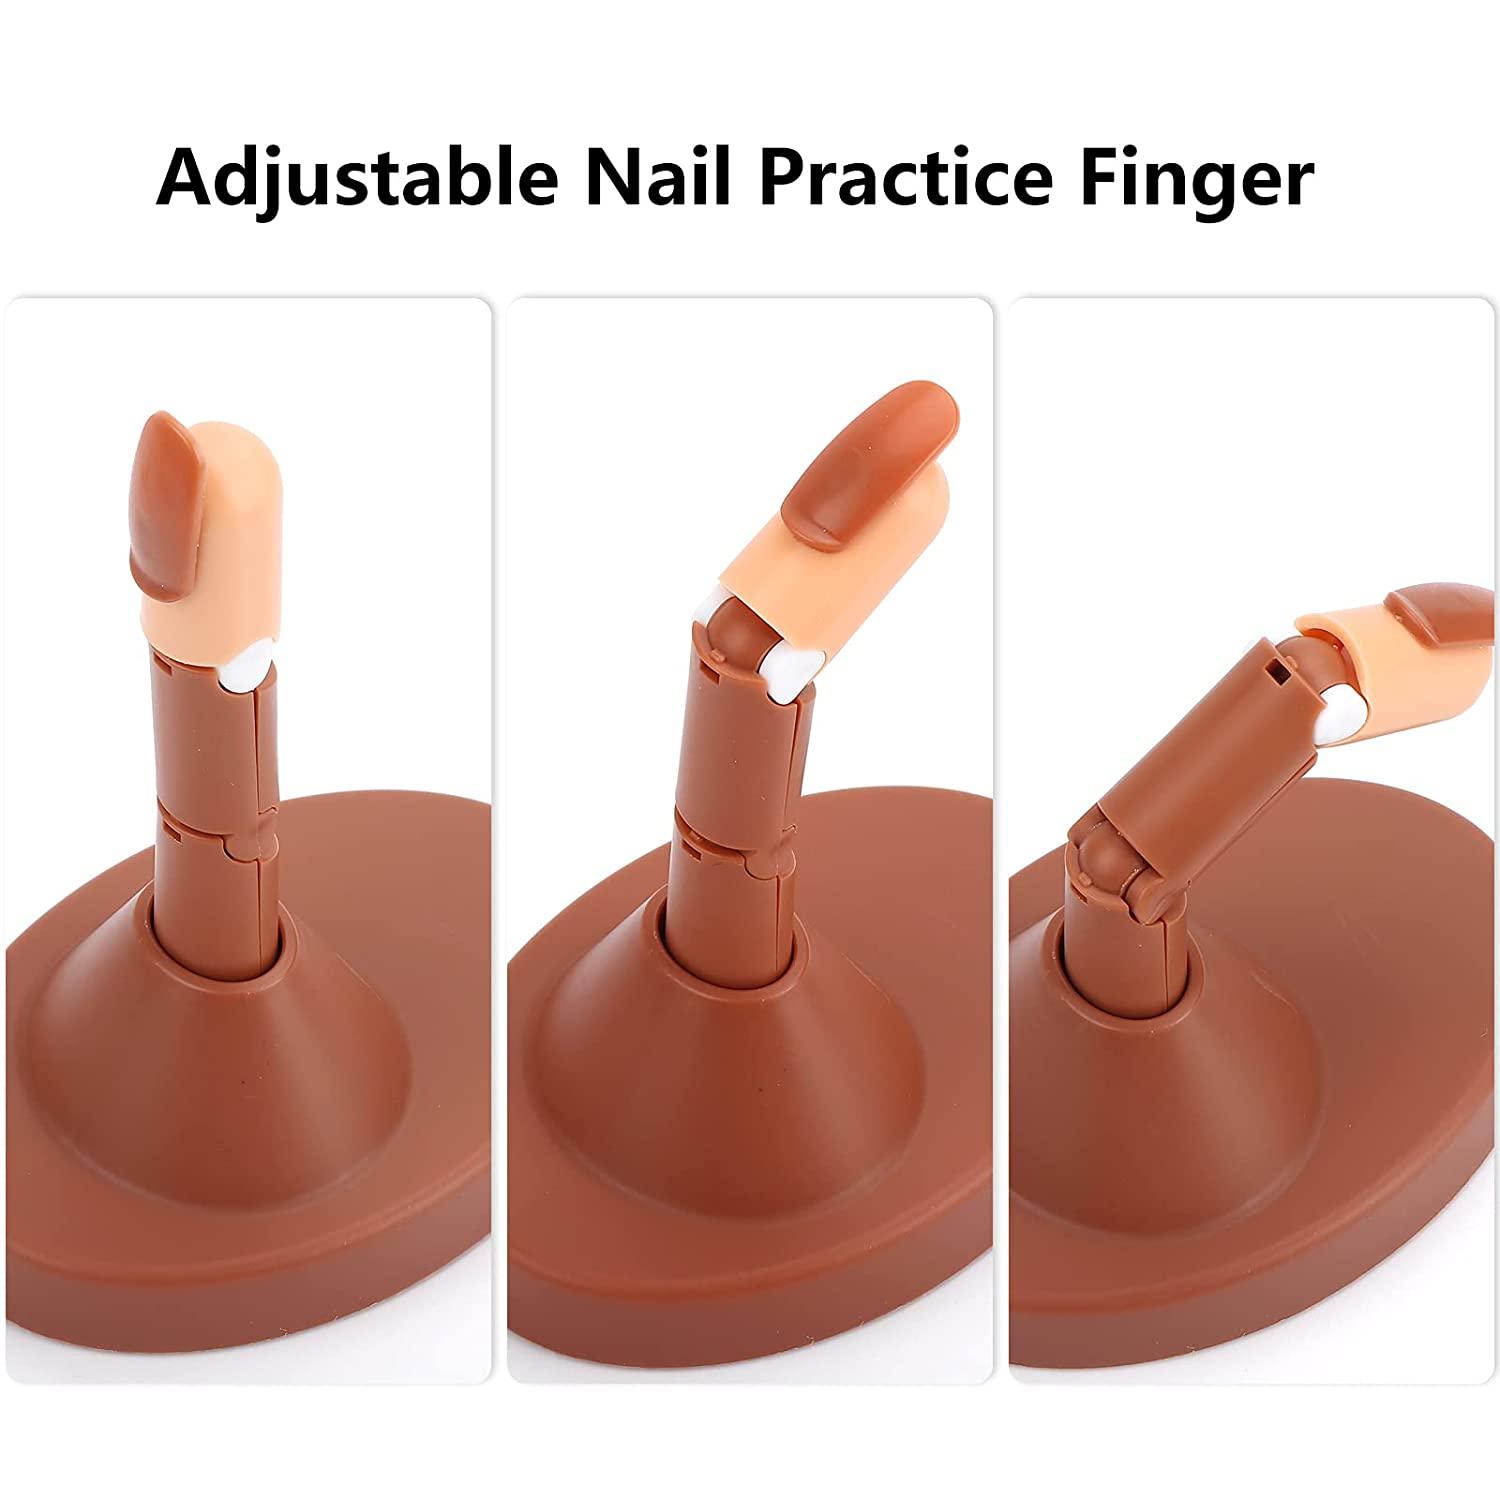 Nail Practice Hand for Acrylic Nails, Flexible Nail Hand Practice